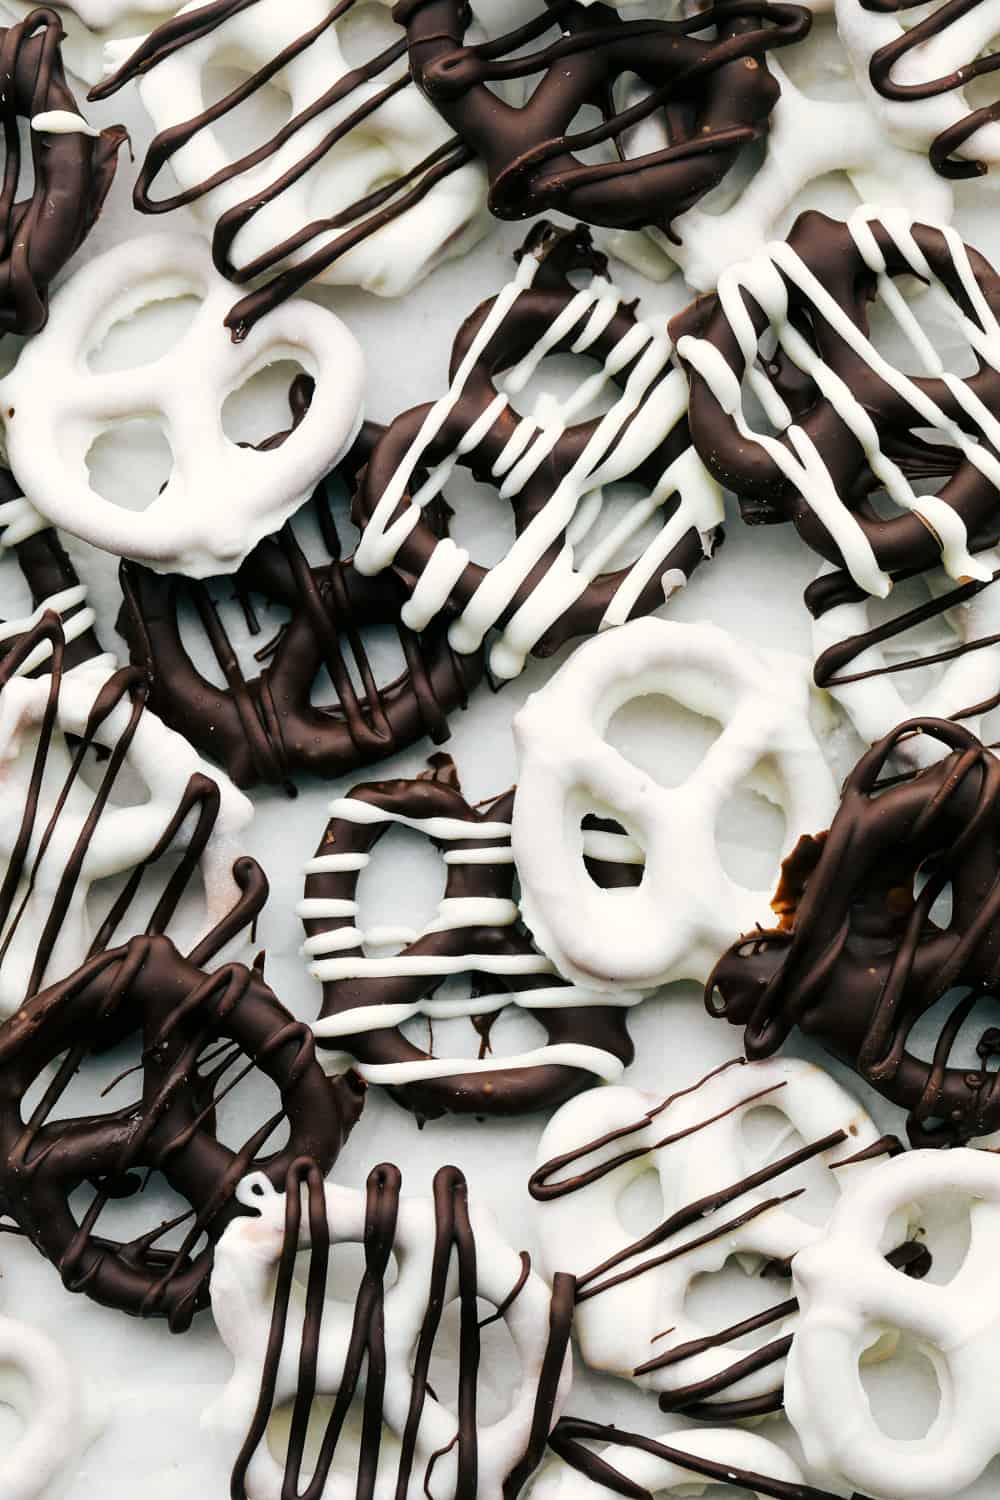 Chocolate Covered Pretzels